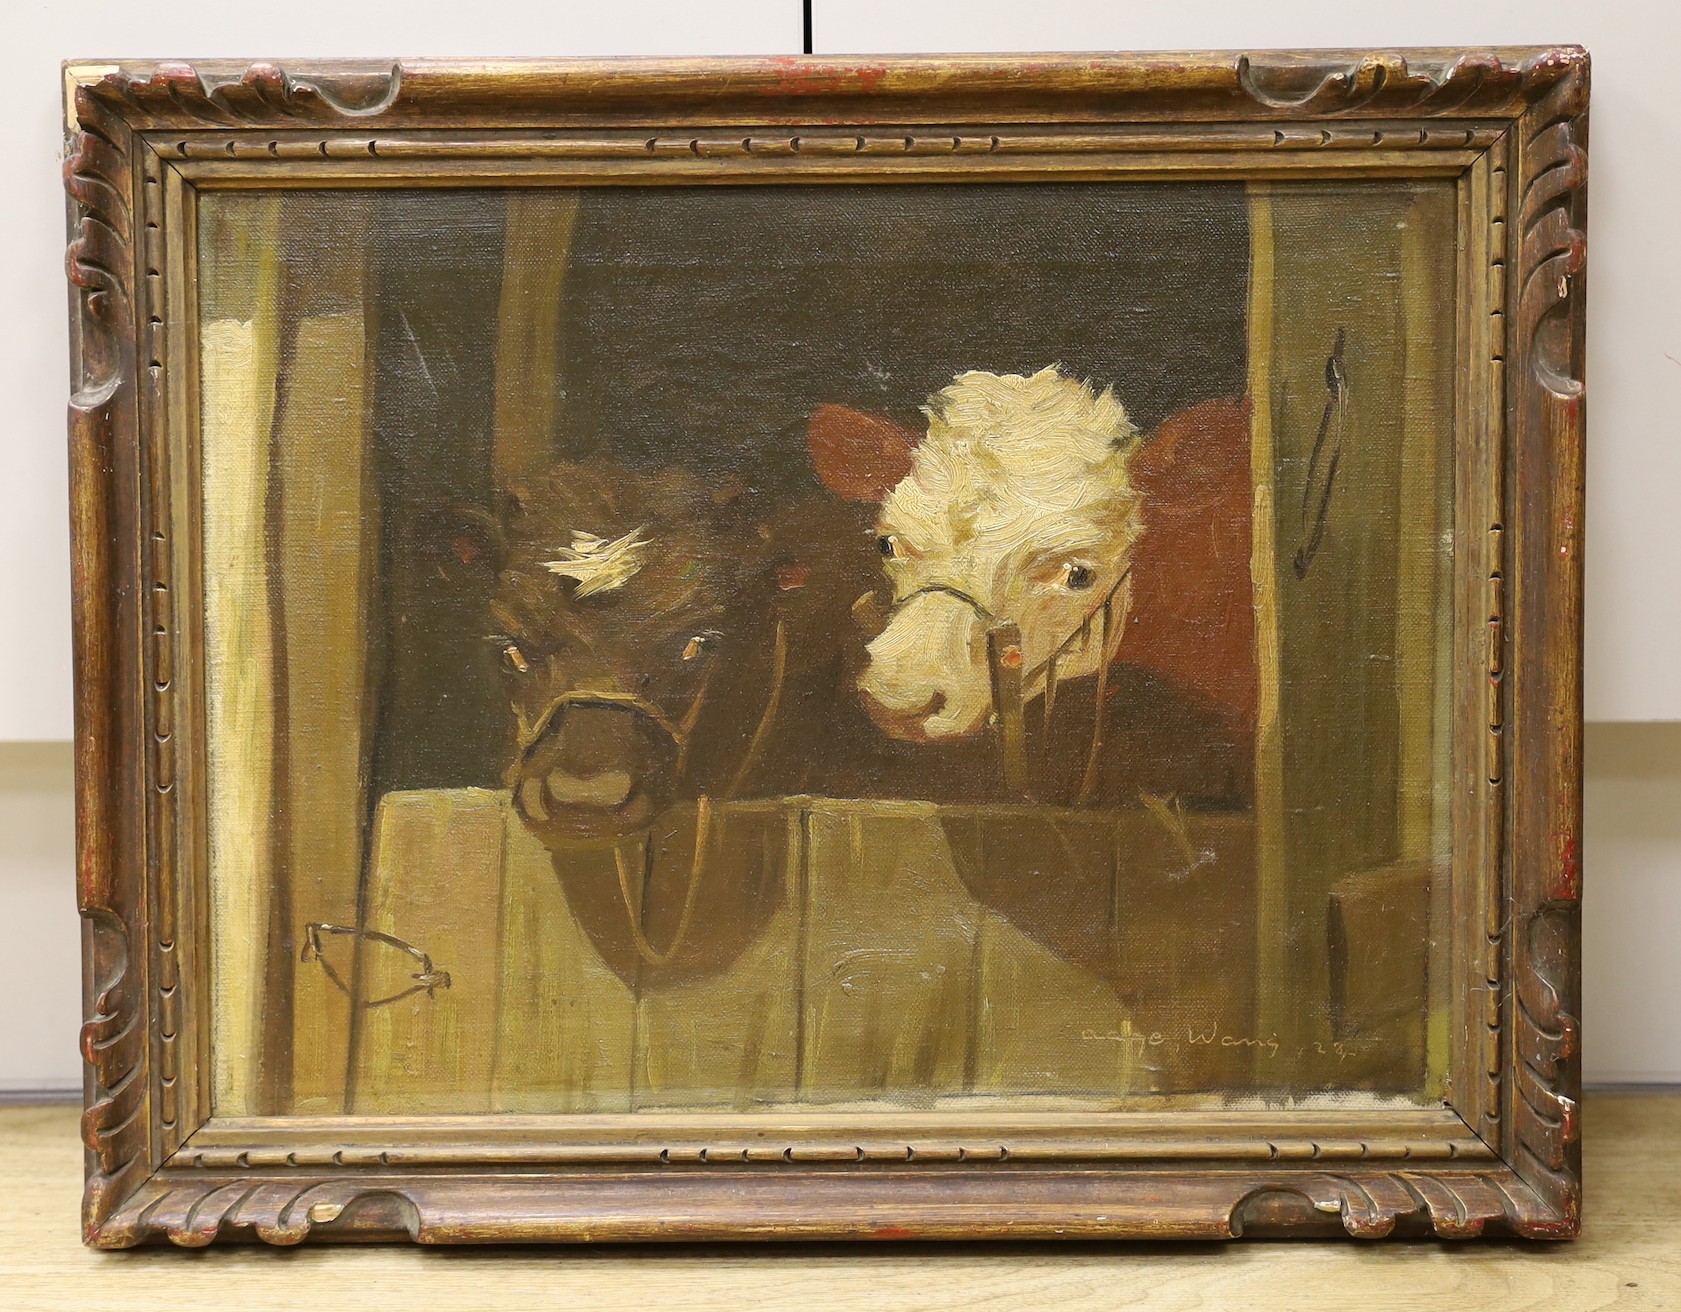 Aage Wang, i.e., Mark Osman Curtis (Danish, 1879-1959), oil on canvas, Two calves looking over a stable, signed and dated '24, 30 x 40cm